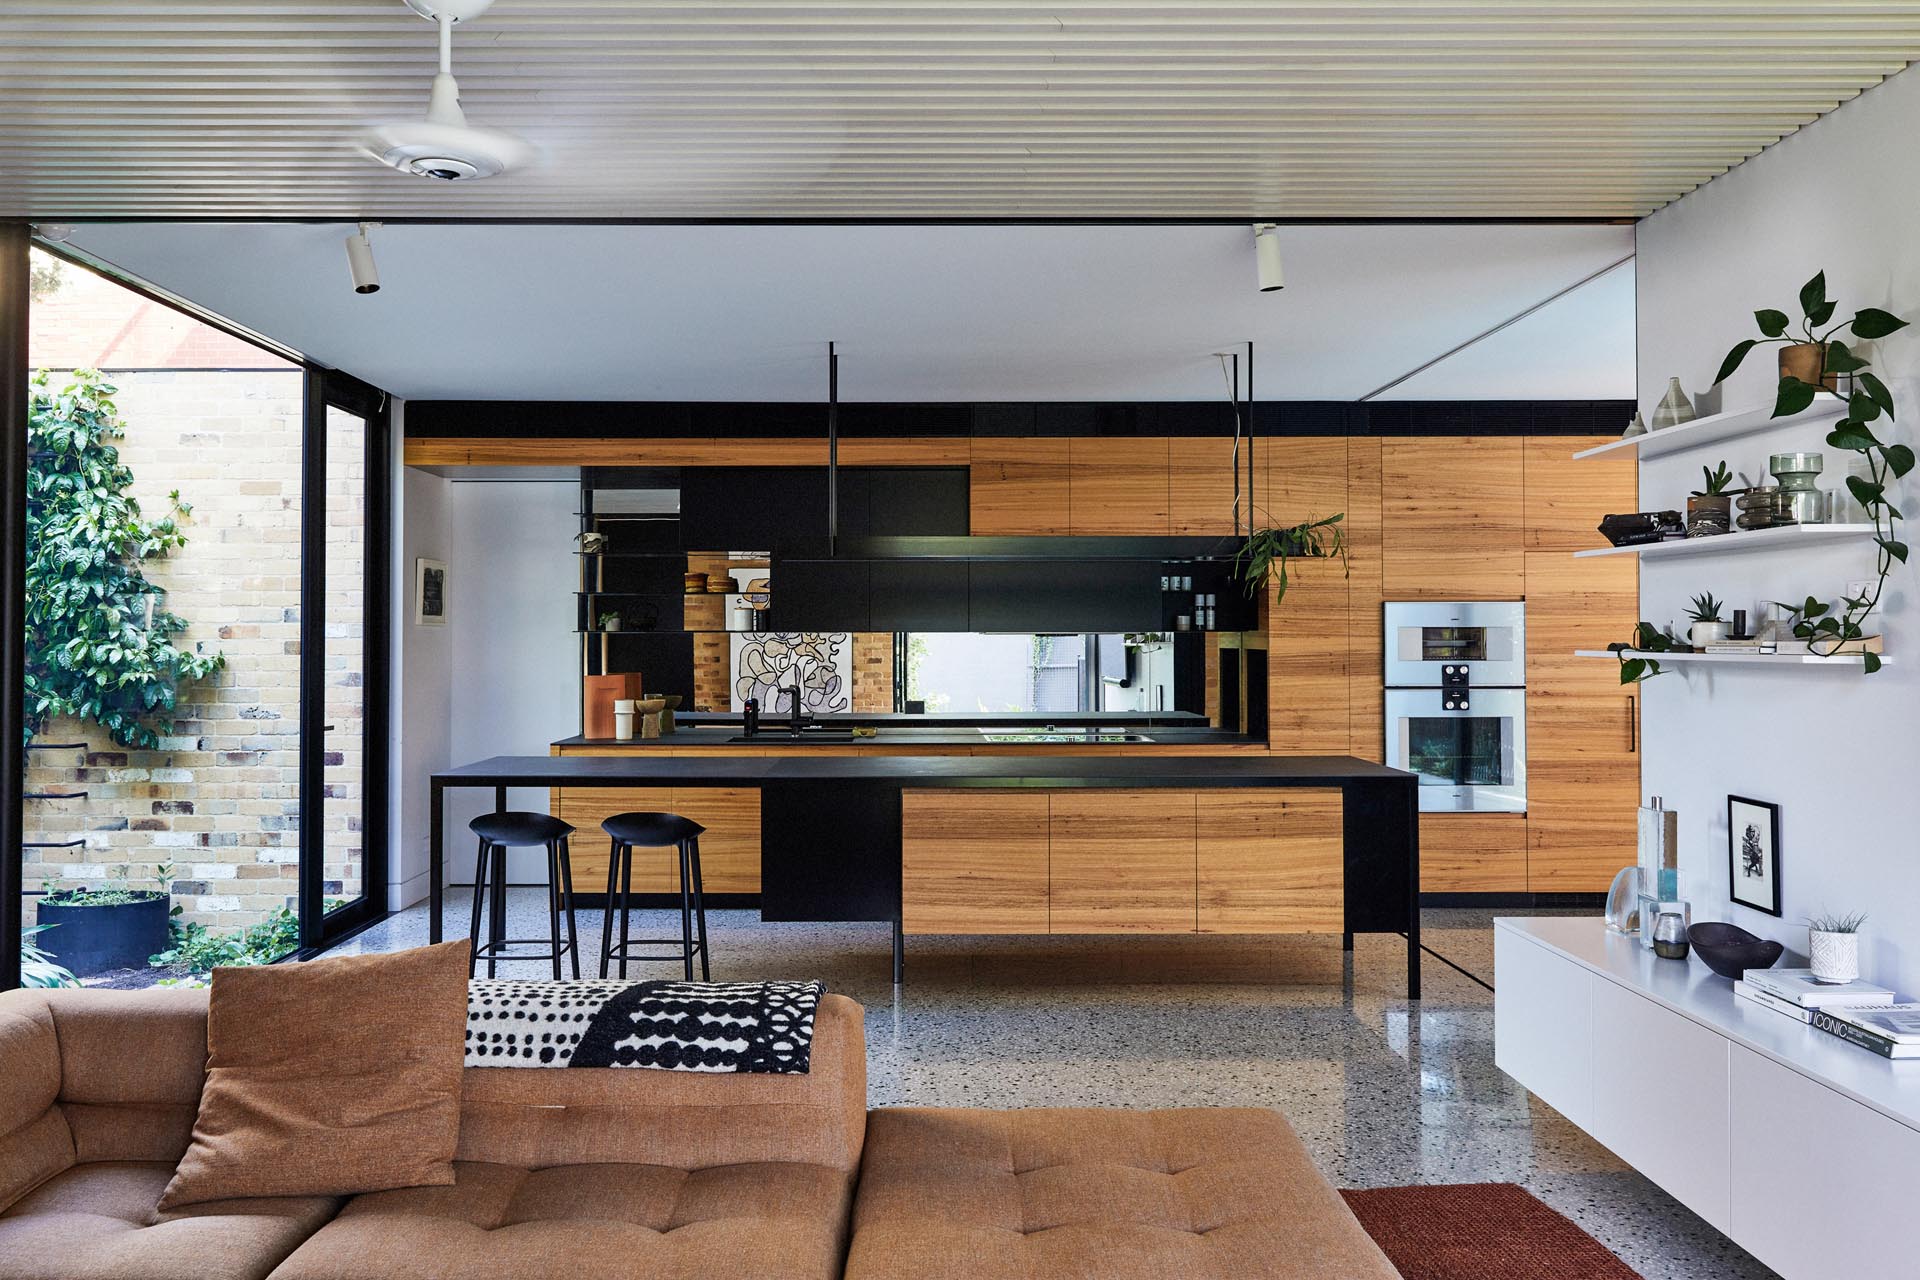 In this modern kitchen, hardware free cabinets line the wall, while the black island and shelving creates a contrasting element, and the mirrored backsplash reflects the living room.